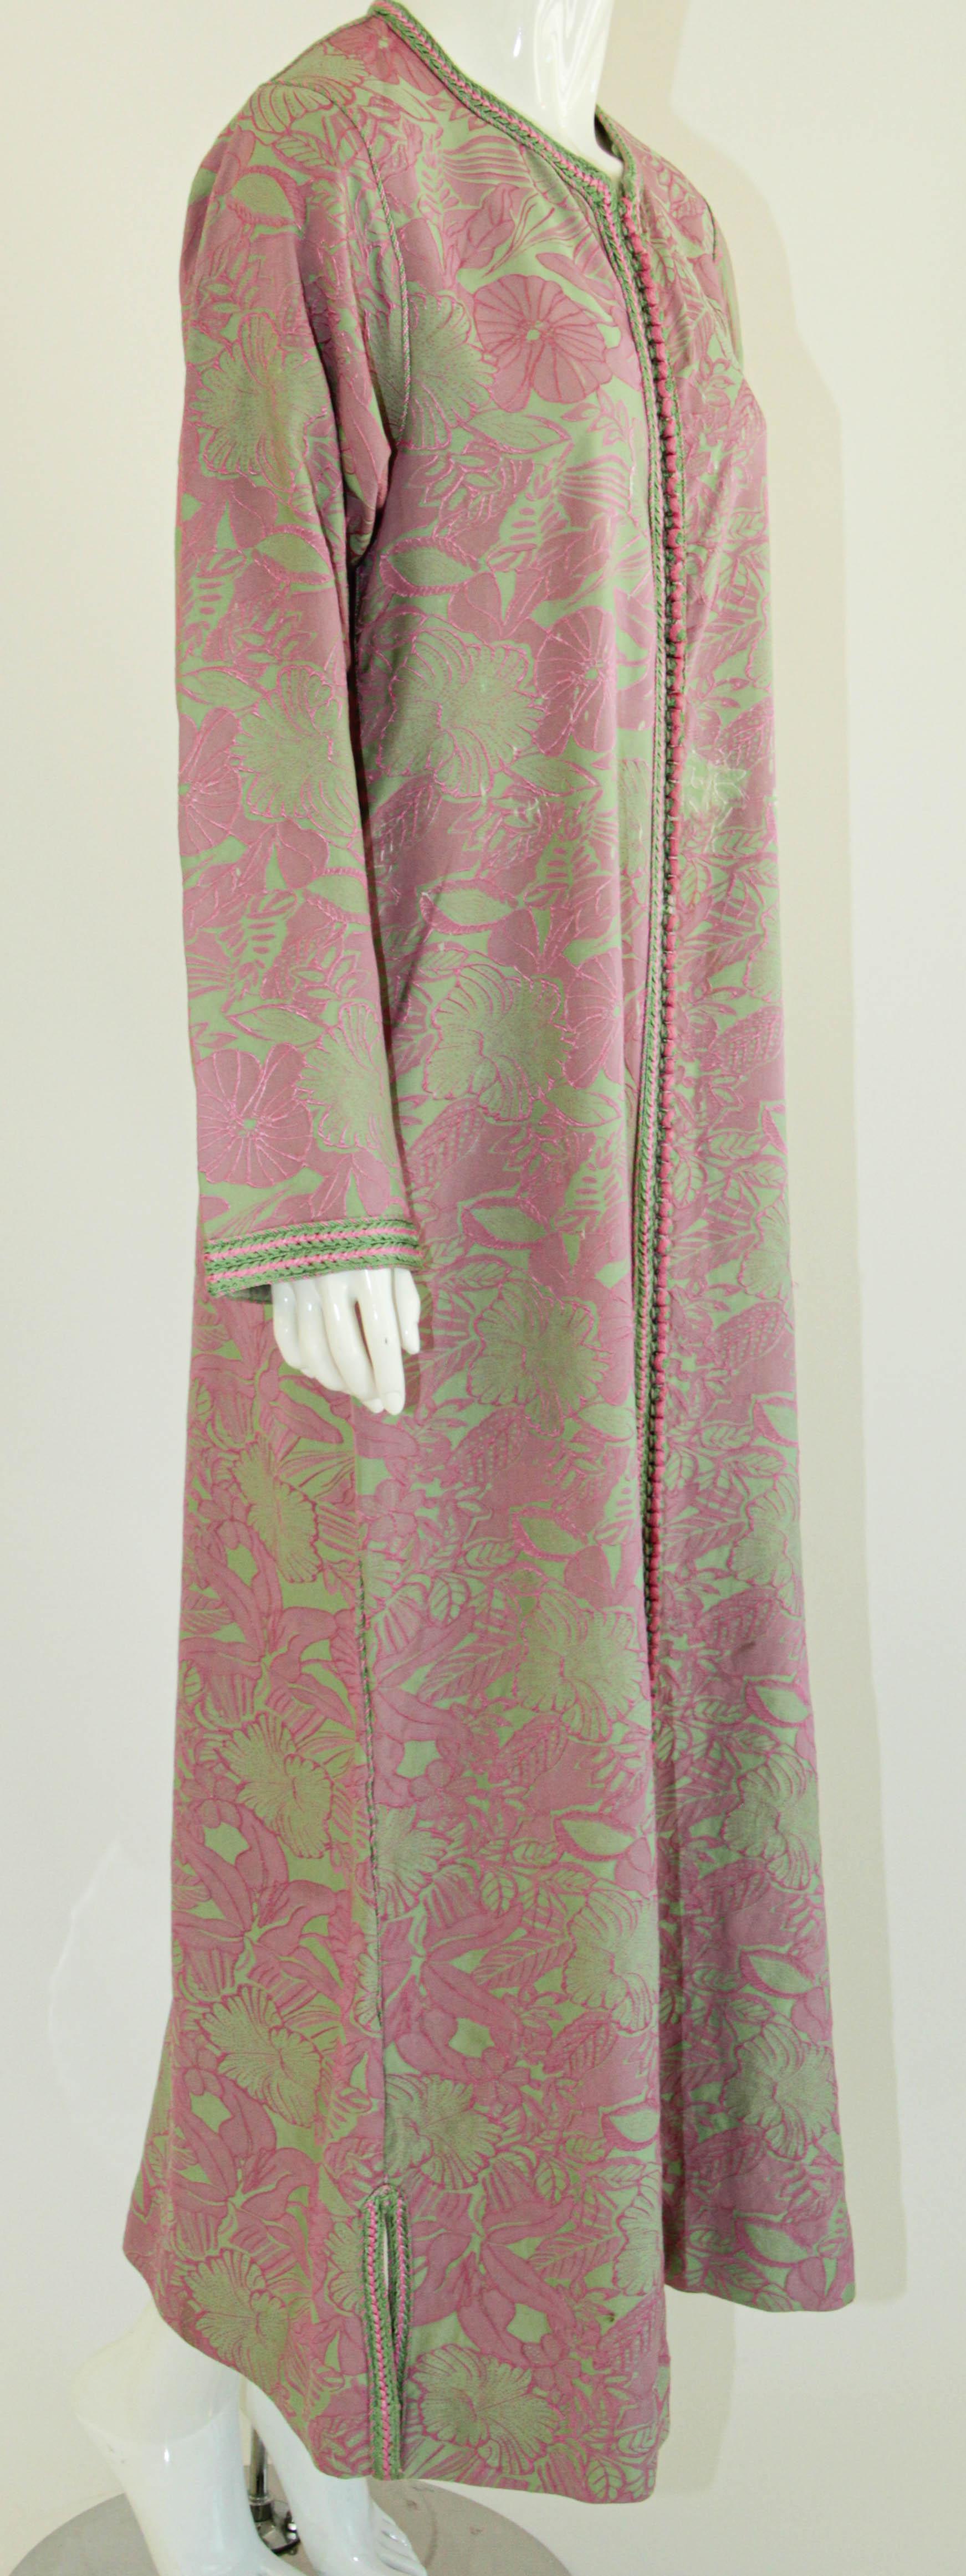 Moroccan Vintage Caftan Pink and Green Trim For Sale 11